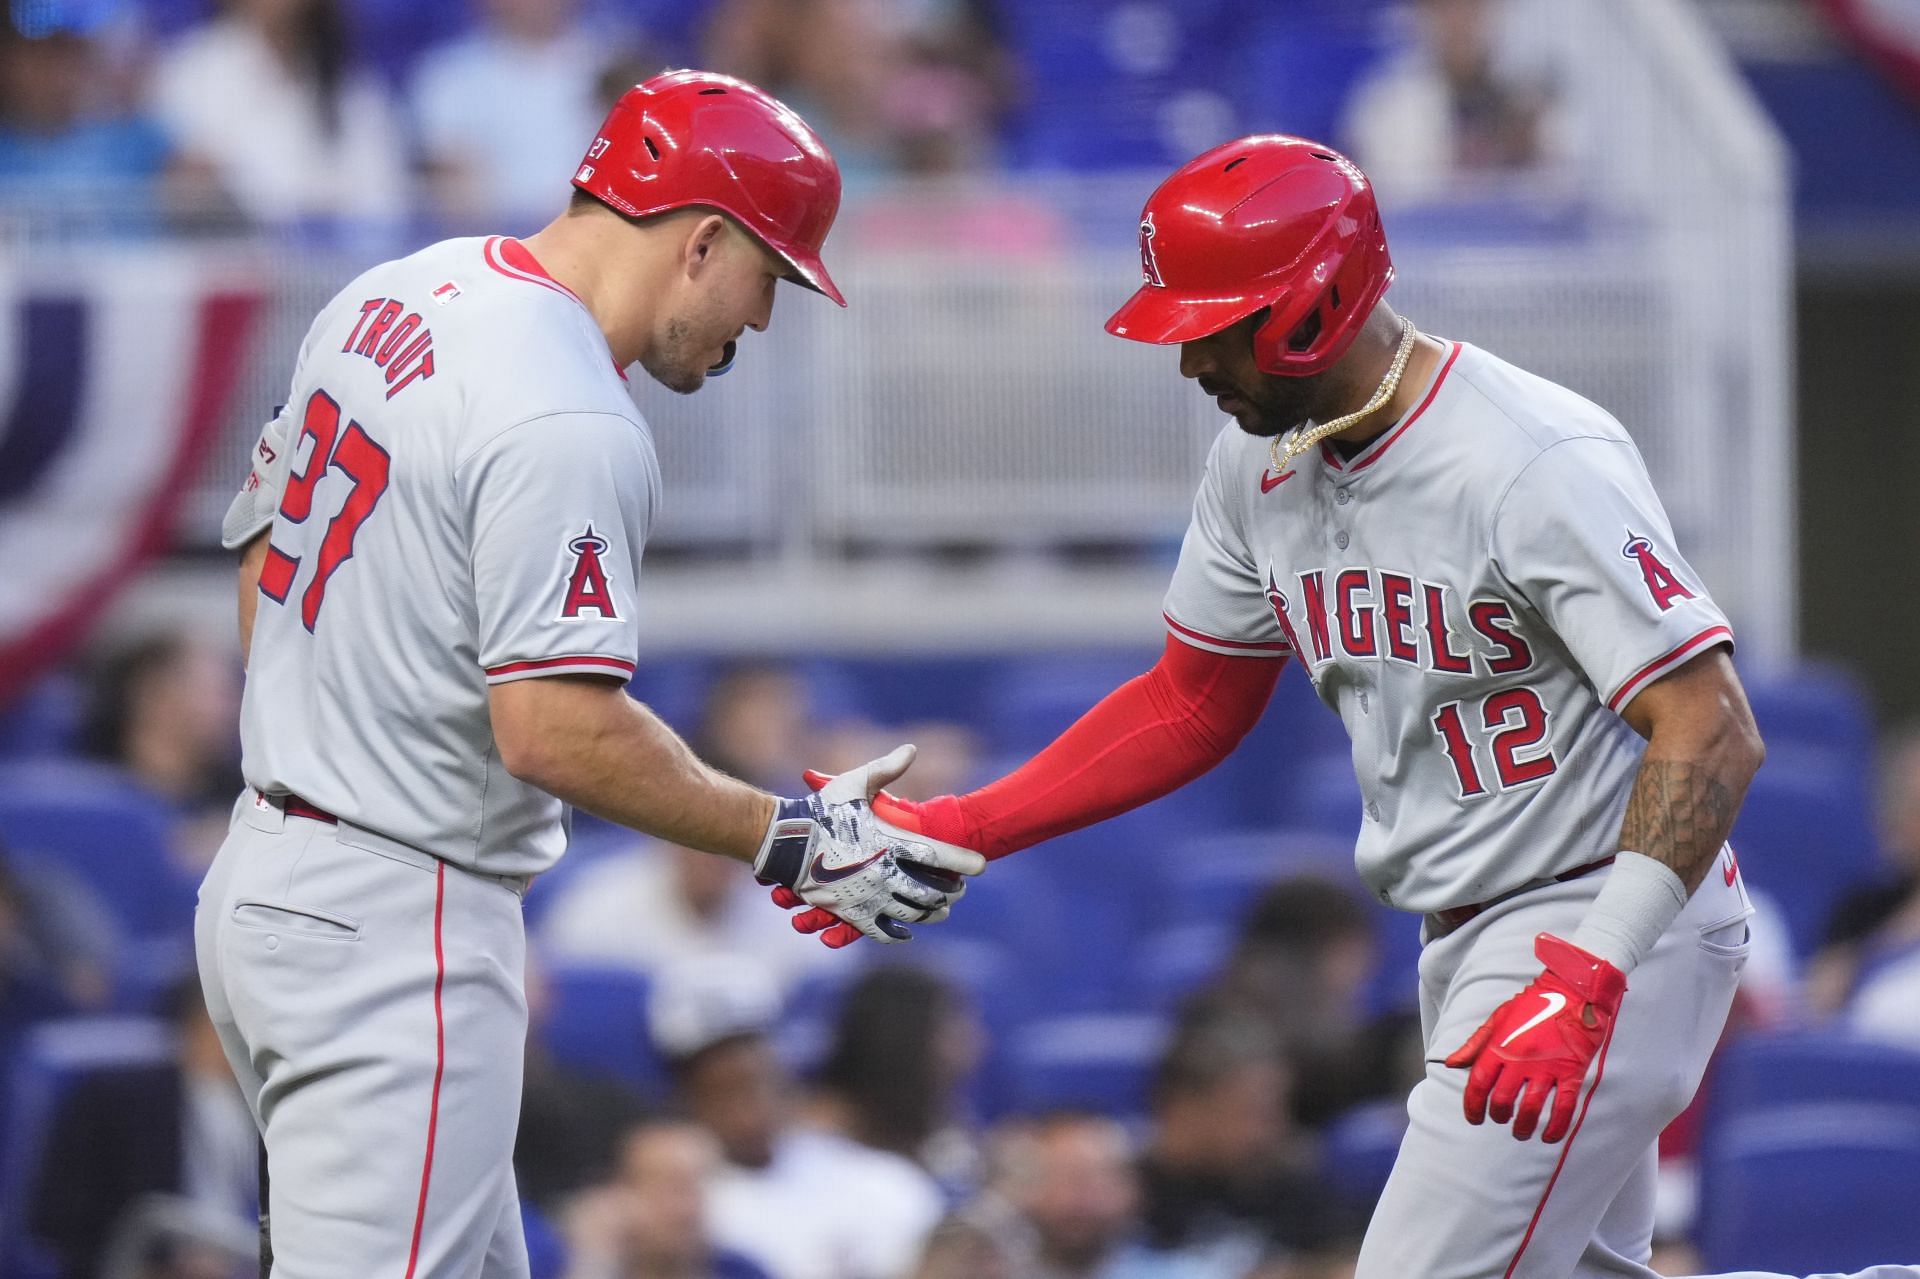 Los Angeles Angels - Mike Trout and Aaron Hicks (Image via Getty)